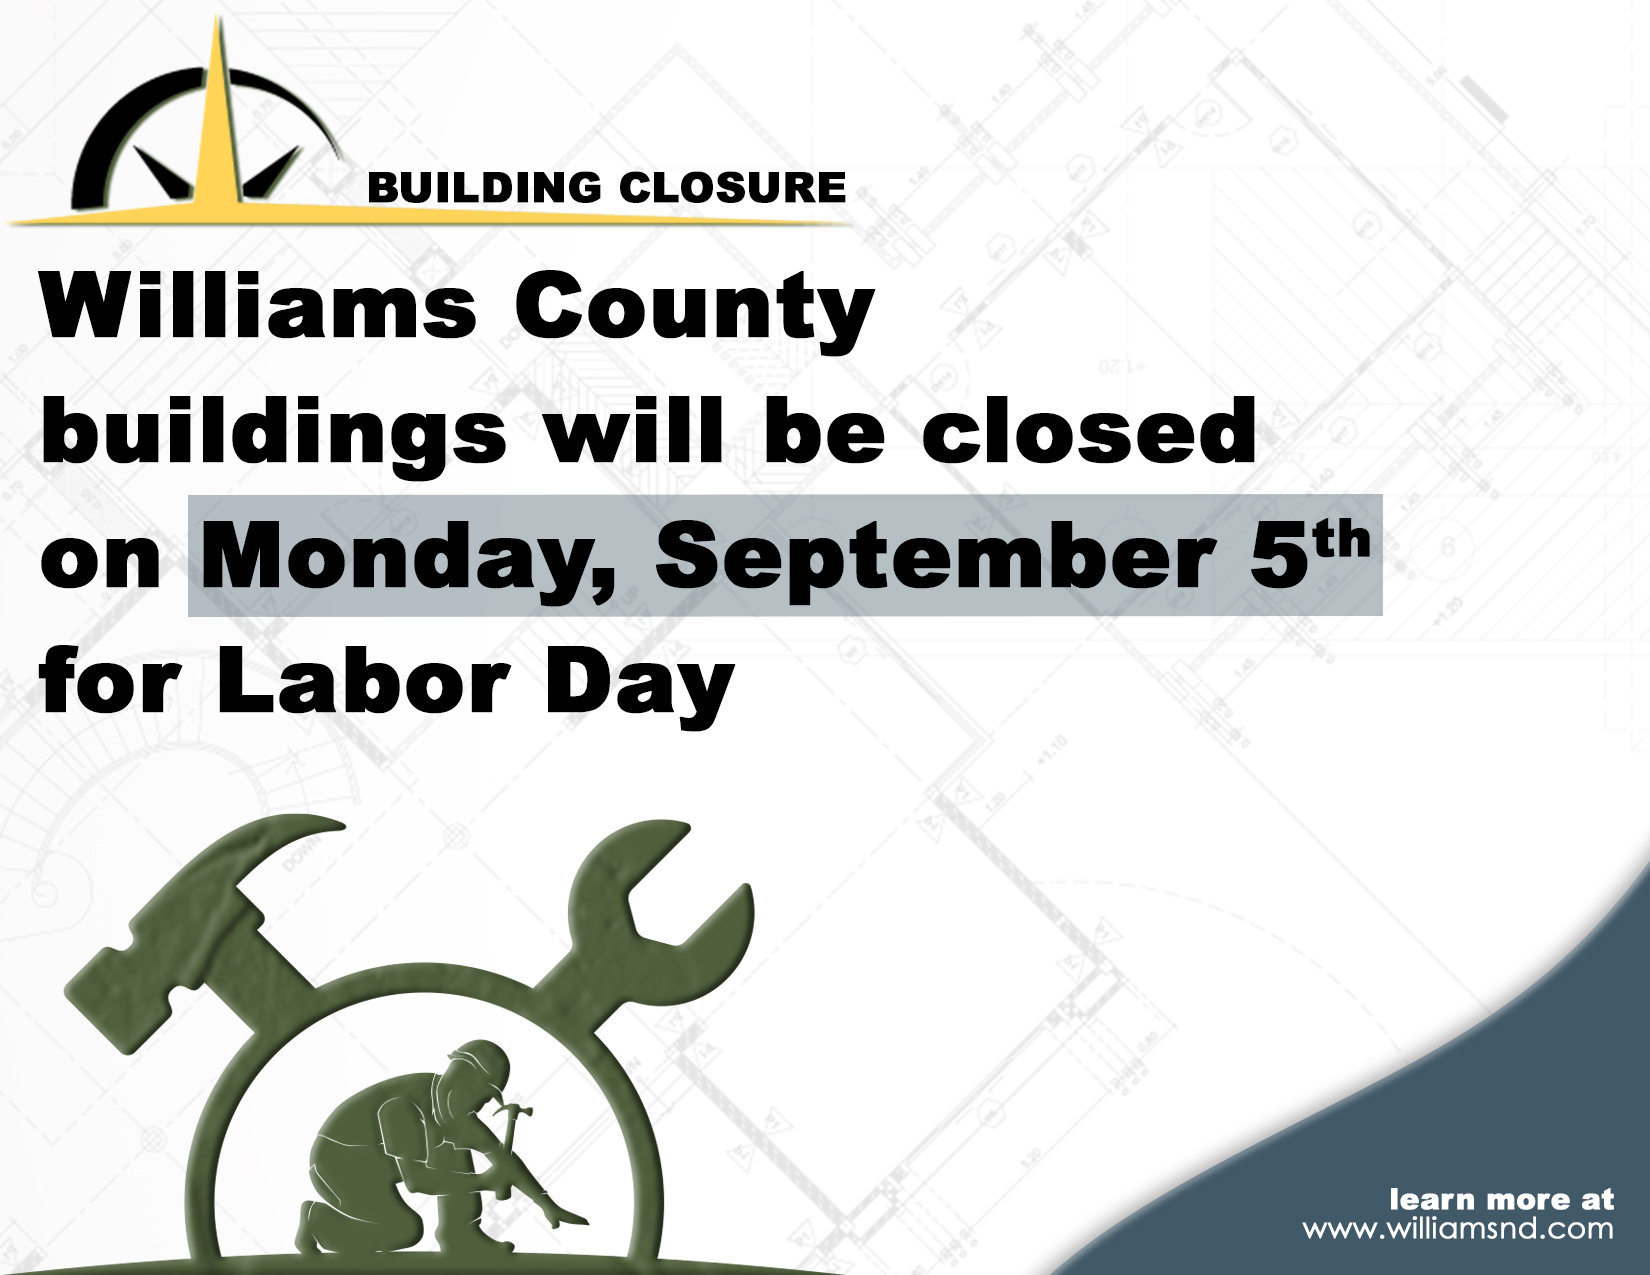 Building blueprints and image of construction worker with tools with text Williams County buildings will be closed on Monday, September 5th for Labor Day